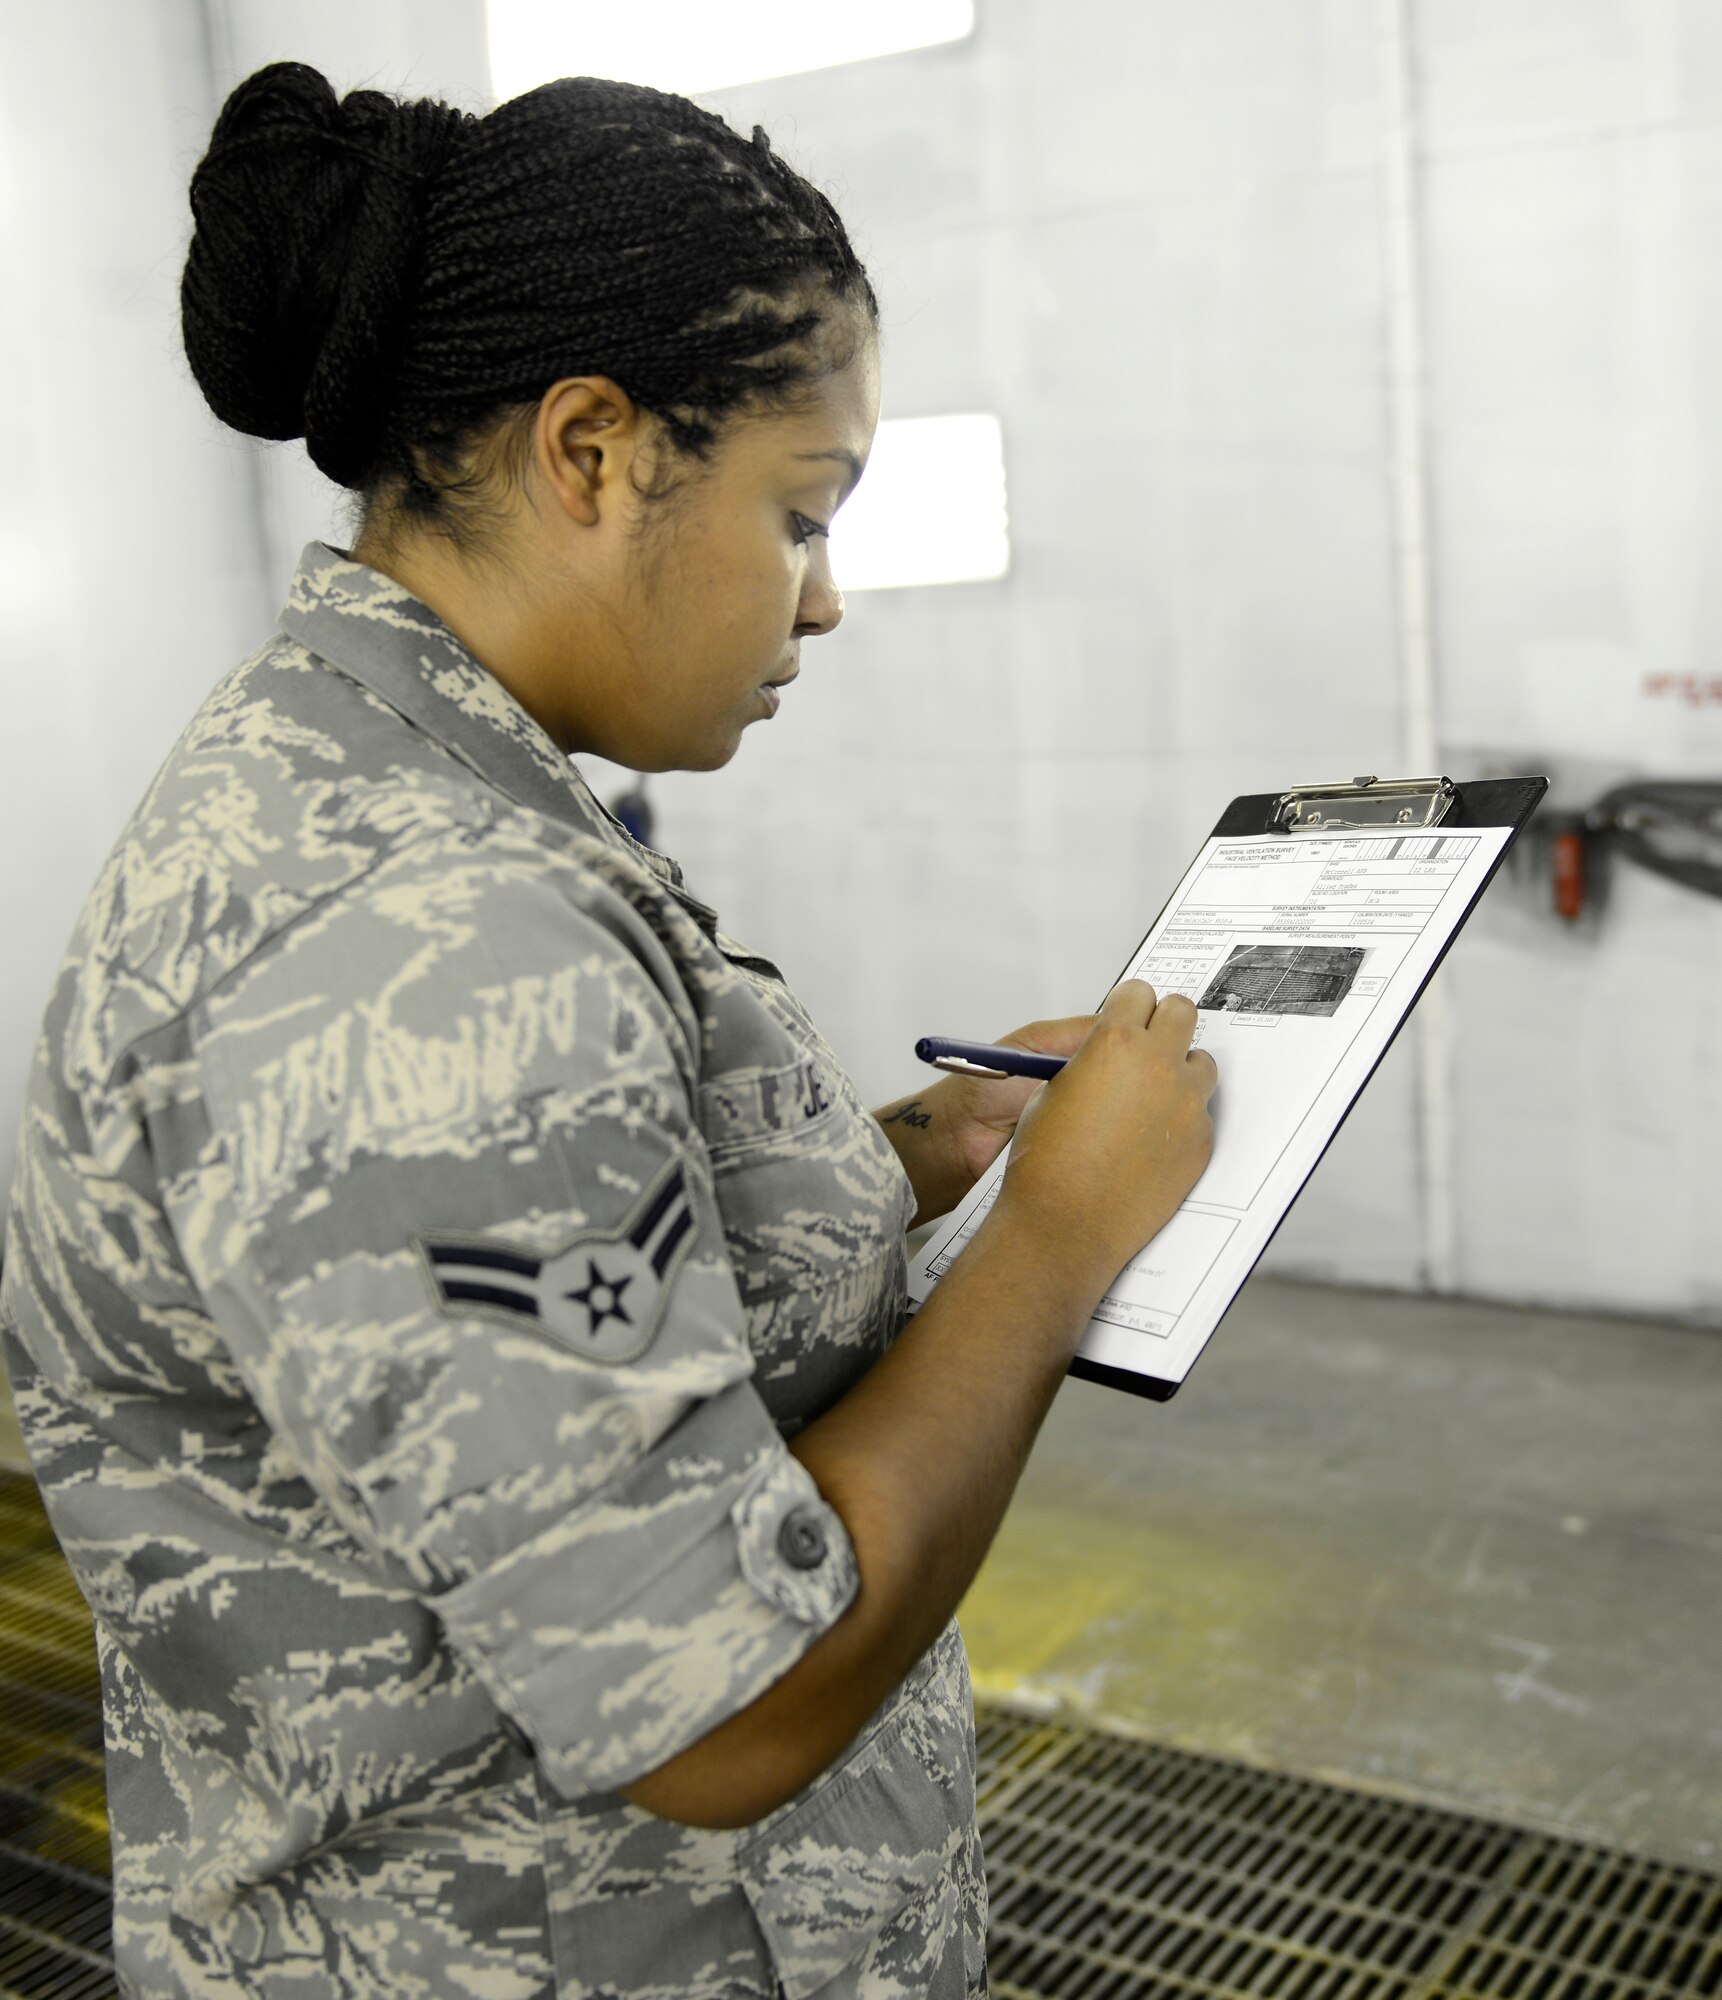 Airman 1st Class Natasha Jeter, 22nd Aerospace Medicine Squadron bioenvironmental technician, annotates a velocity reading, July 30, 2015, at McConnell Air Force Base, Kan. Airmen from the bioenvironmental shop monitor vents in industrial work centers to ensure they’re operating to Air Force standards and are safe for use by the Airmen who operate them. (U.S. Air Force photo by Senior Airman Trevor Rhynes)